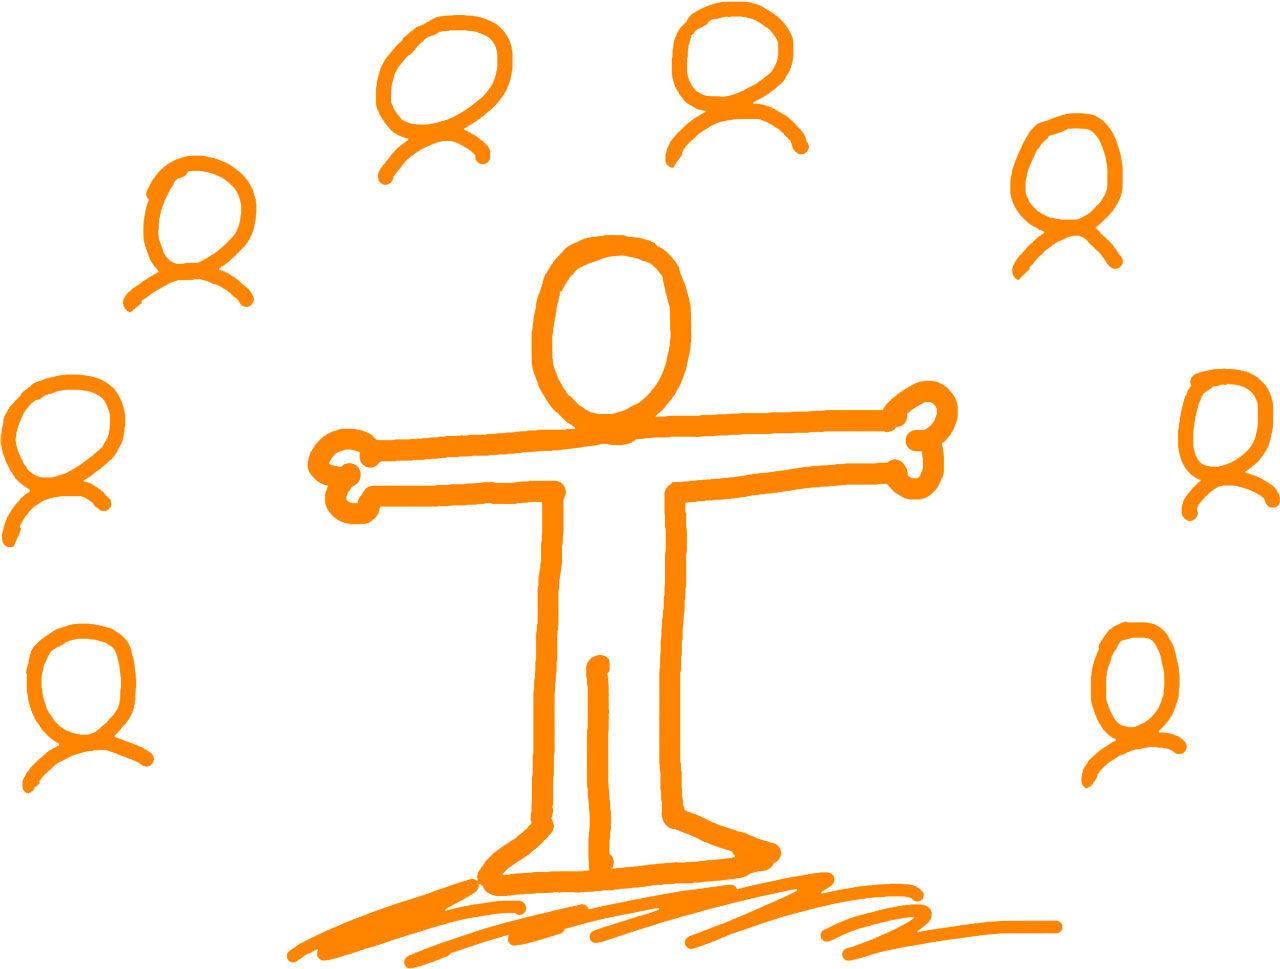 An illustration showing a person positioned in the center with others surrounding them, symbolizing leadership. The central figure appears confident and authoritative, while the surrounding individuals look towards them, indicating their role as a leader within the group.